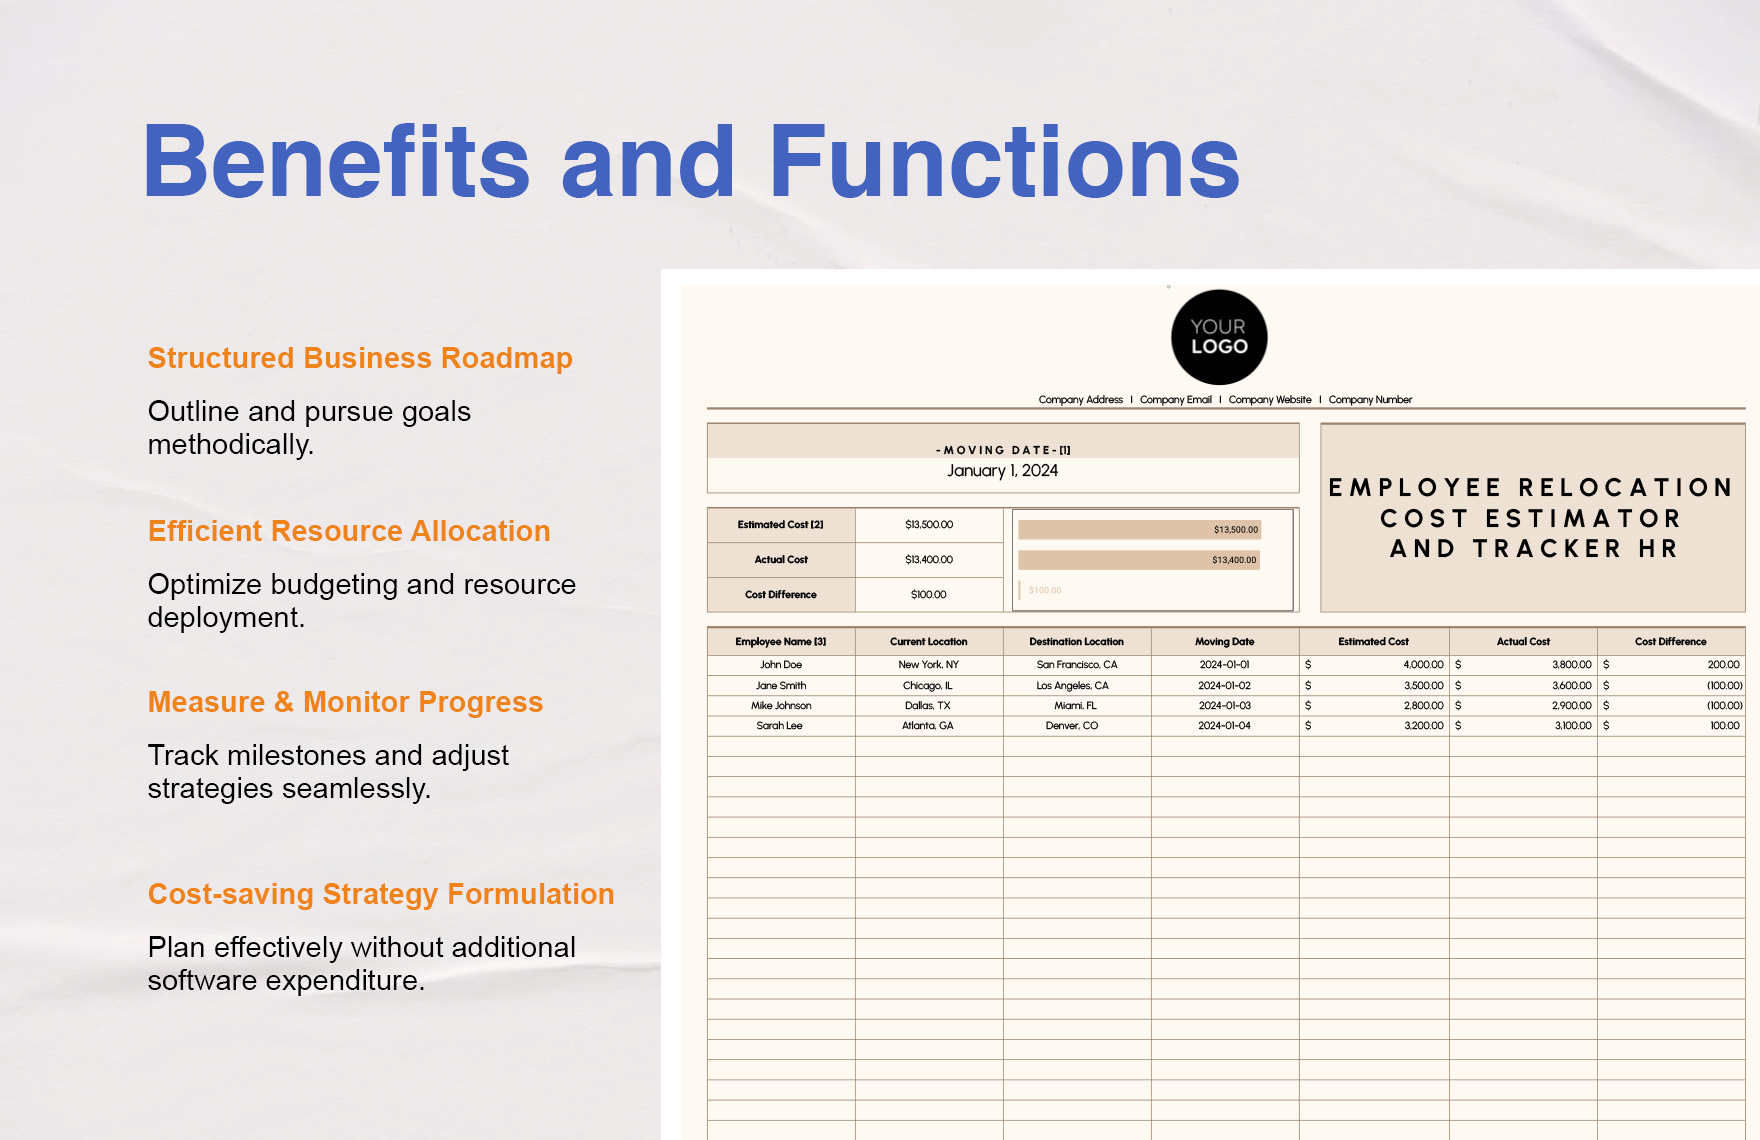 Employee Relocation Cost Estimator and Tracker HR Template